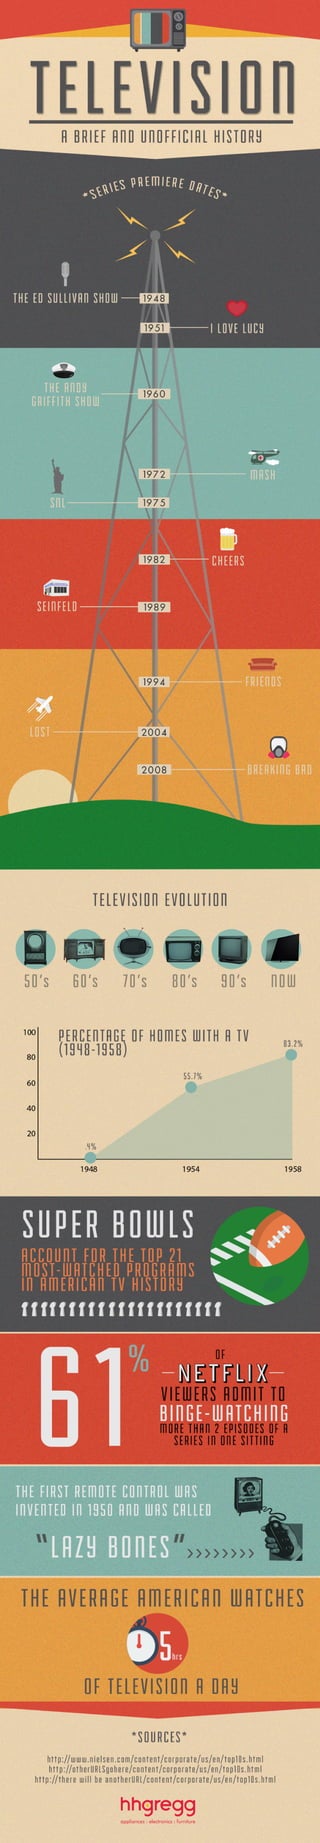 History of TV Infographic